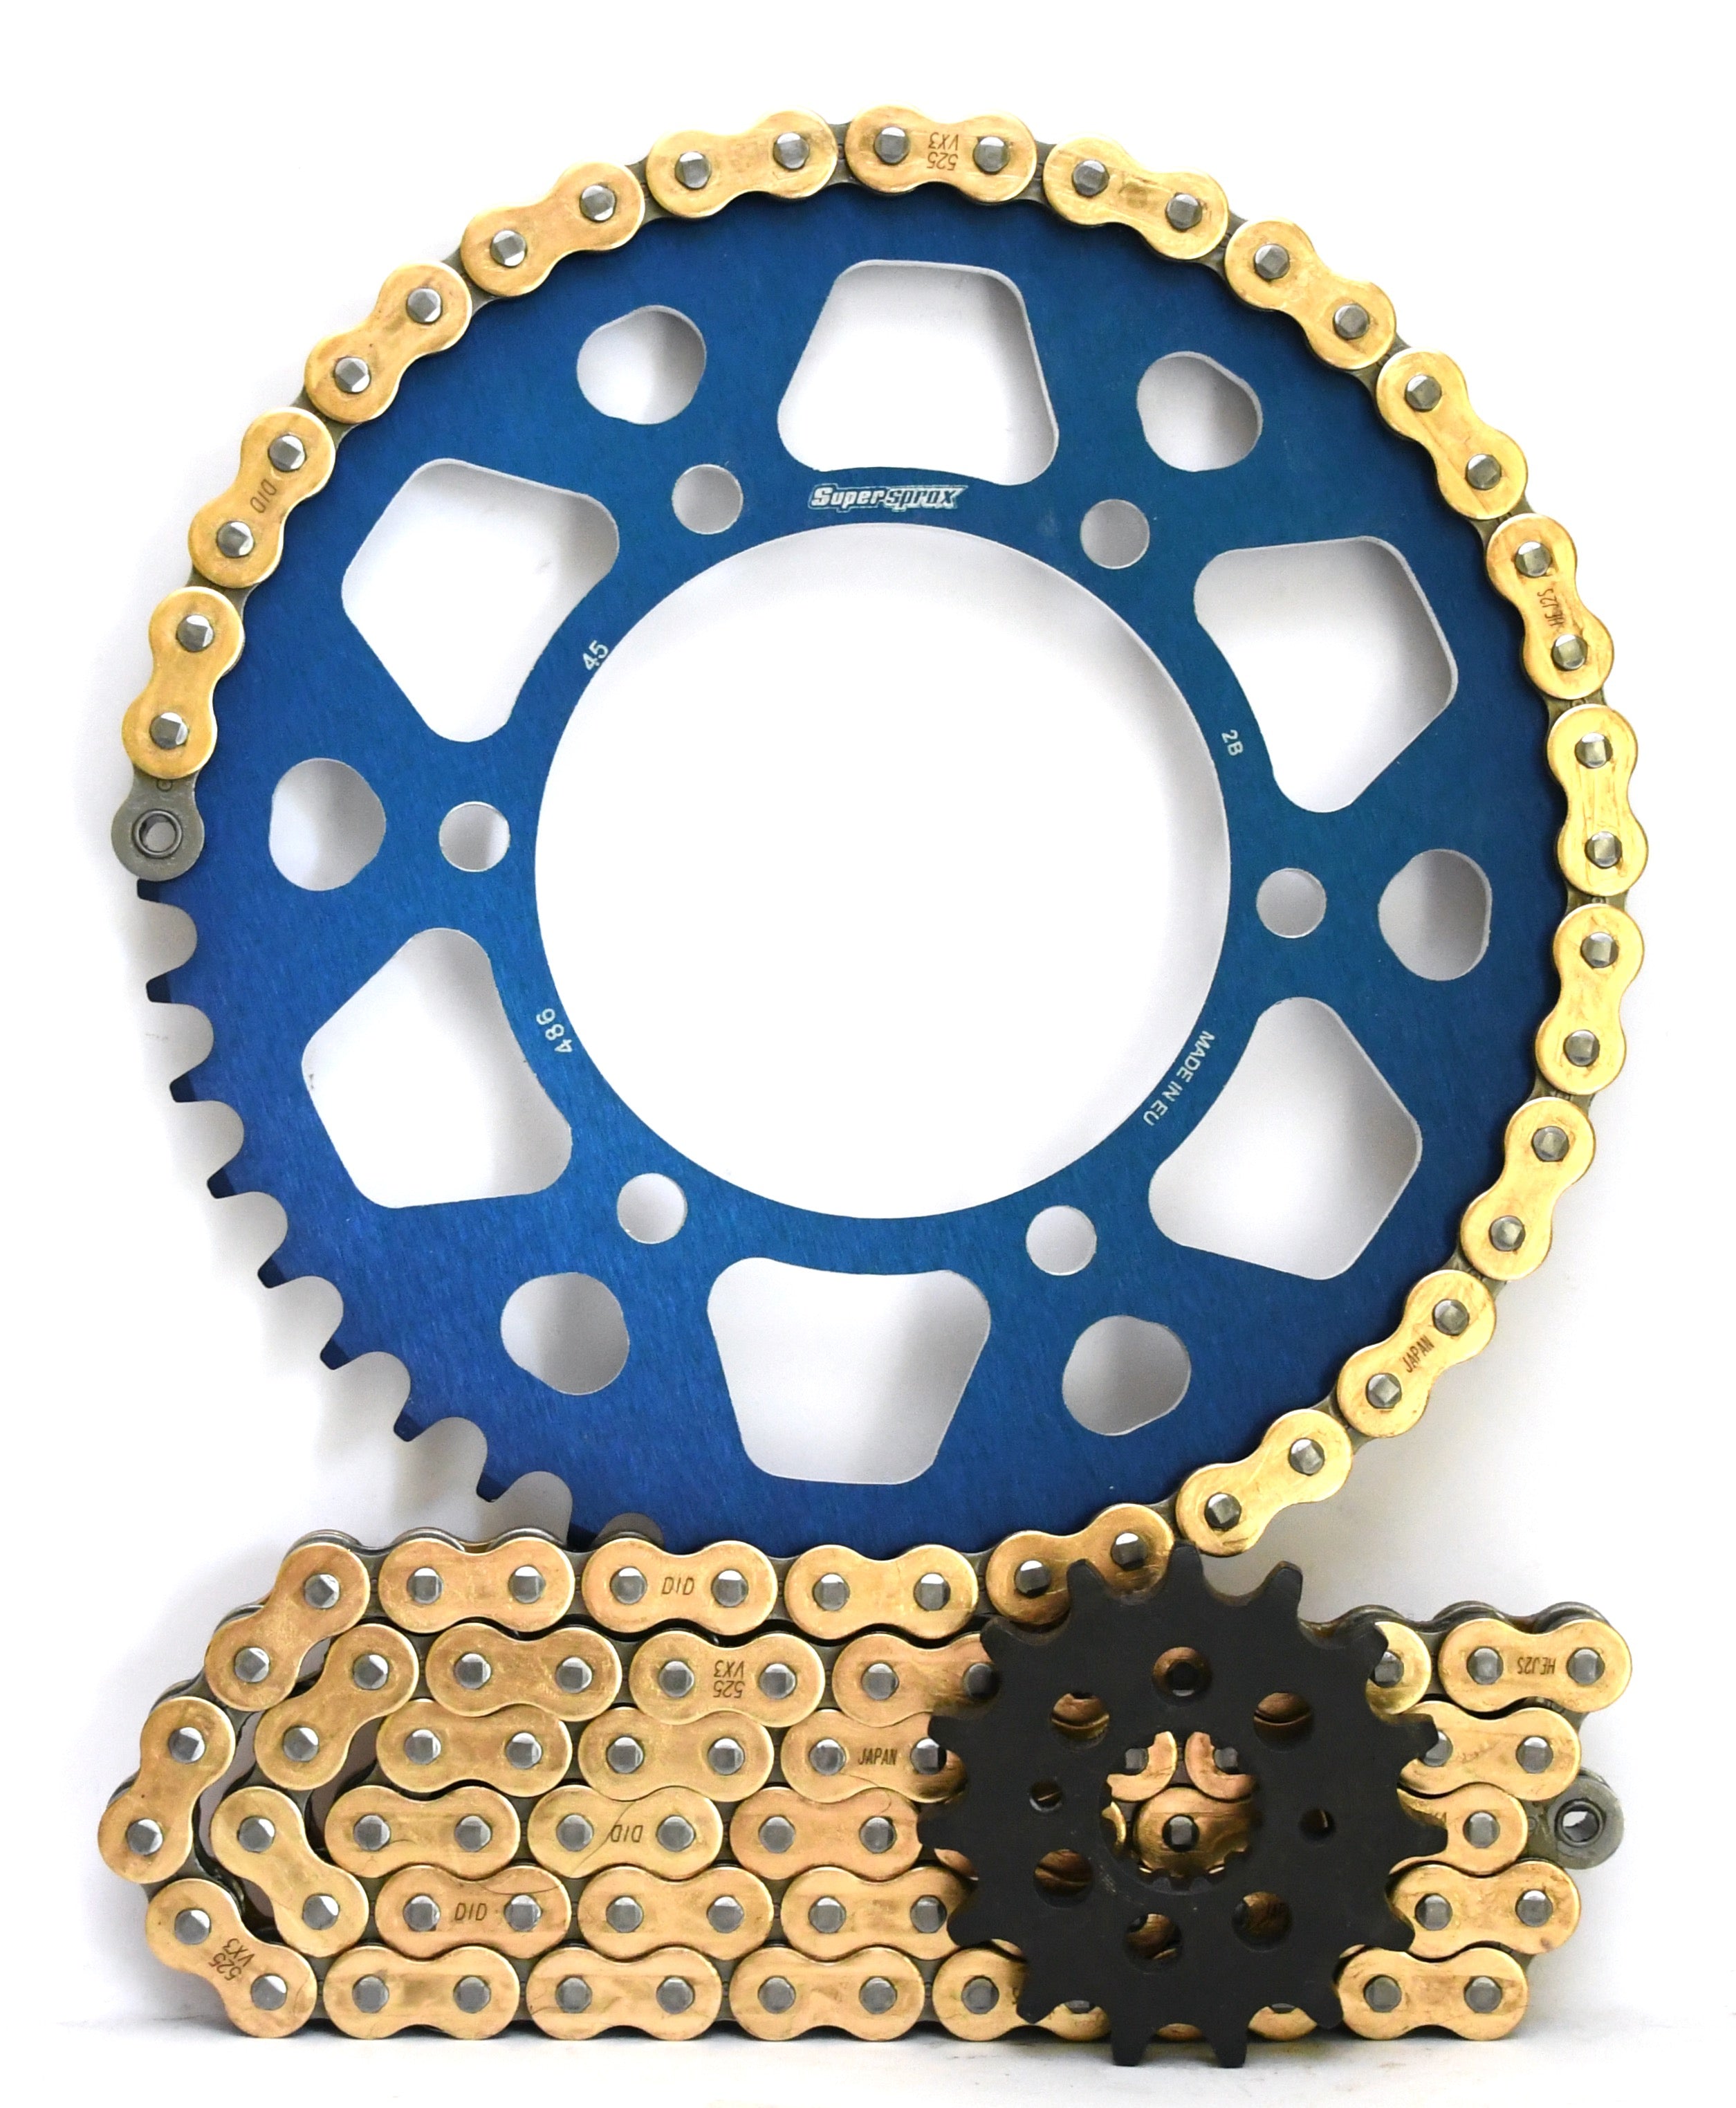 Supersprox Aluminium and DID Chain & Sprocket Kit for Yamaha R6 2006> - 520 Conversion - Standard Gearing